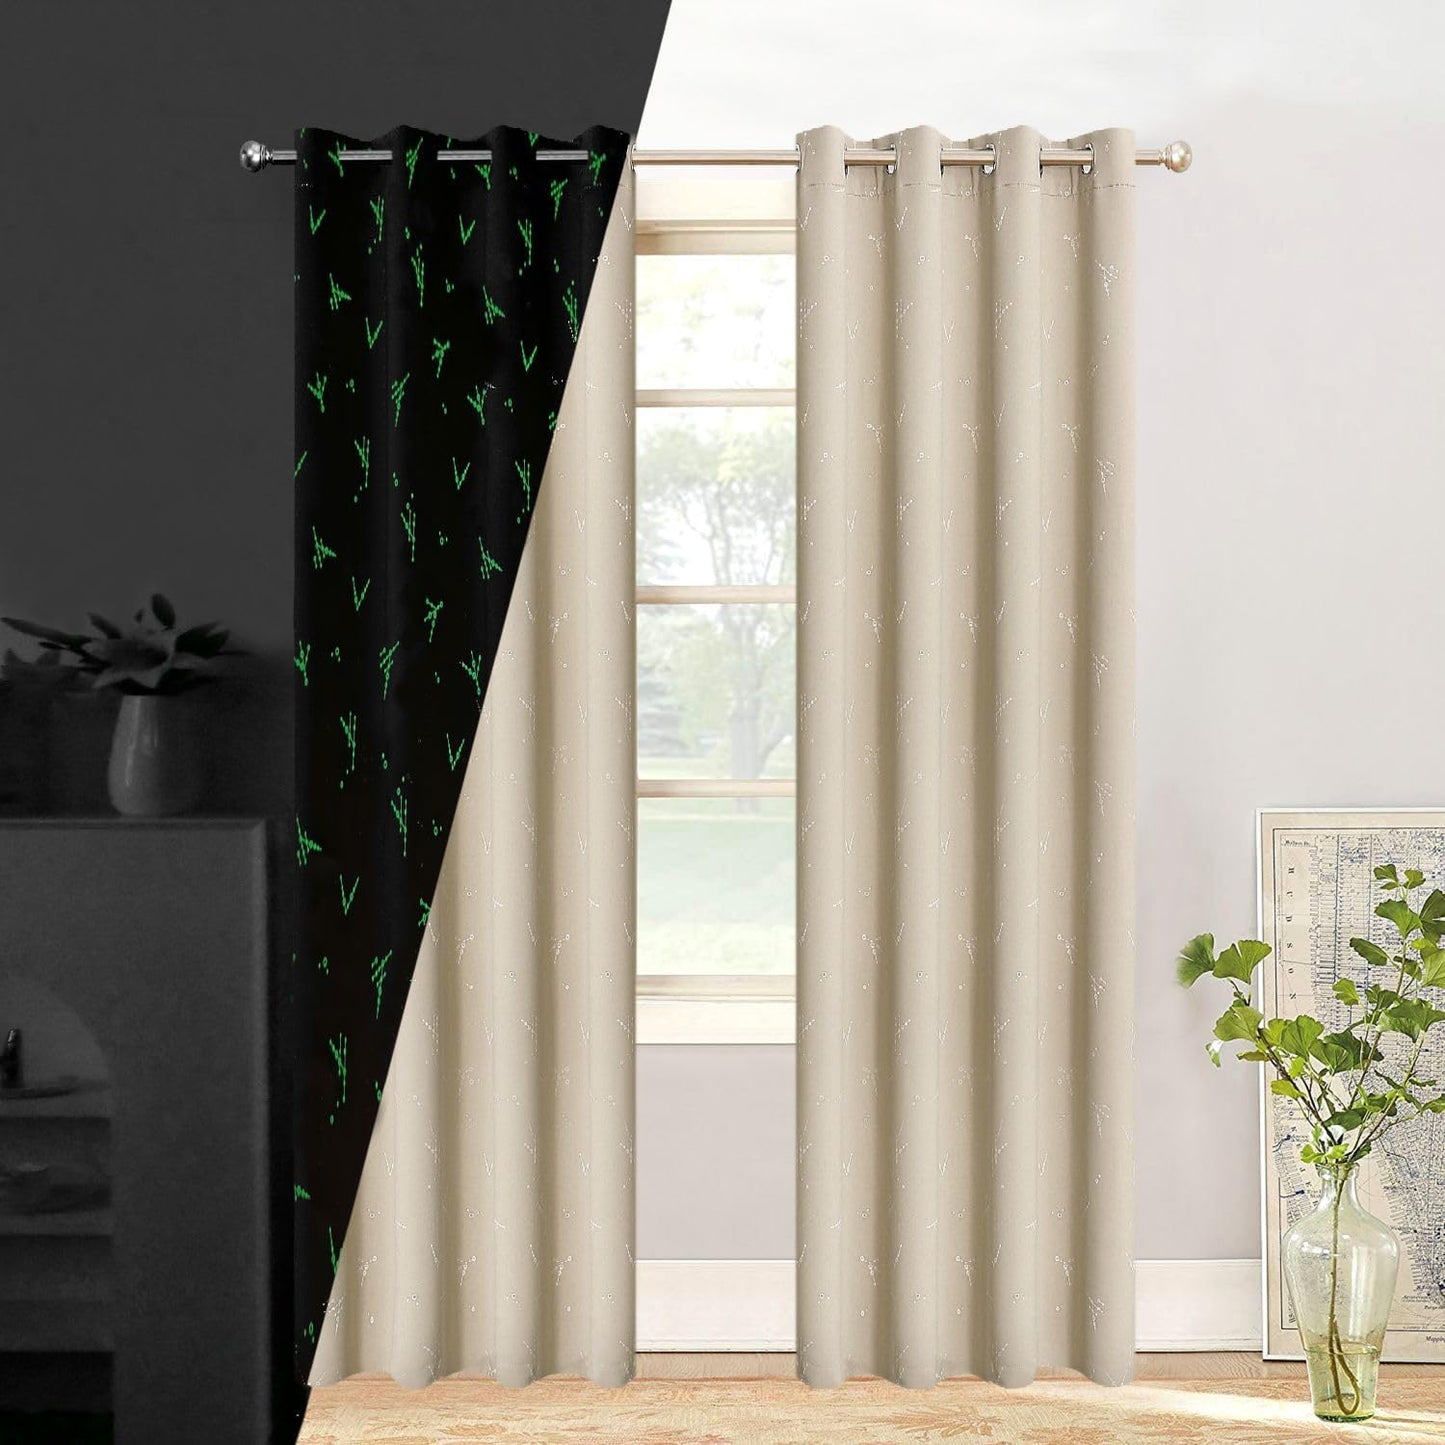 TMLTCOR Blackout Curtains for Bedroom,Bedroom Curtains for Living Room,Room Darkening Curtains 84 Inches Long,Glow in the Dark Navy Blue Curtains for Kids Bedroom,52 Inches Wide,2 Panels,Curve  TMLTCOR Beige/Spot 52"W*96"L 